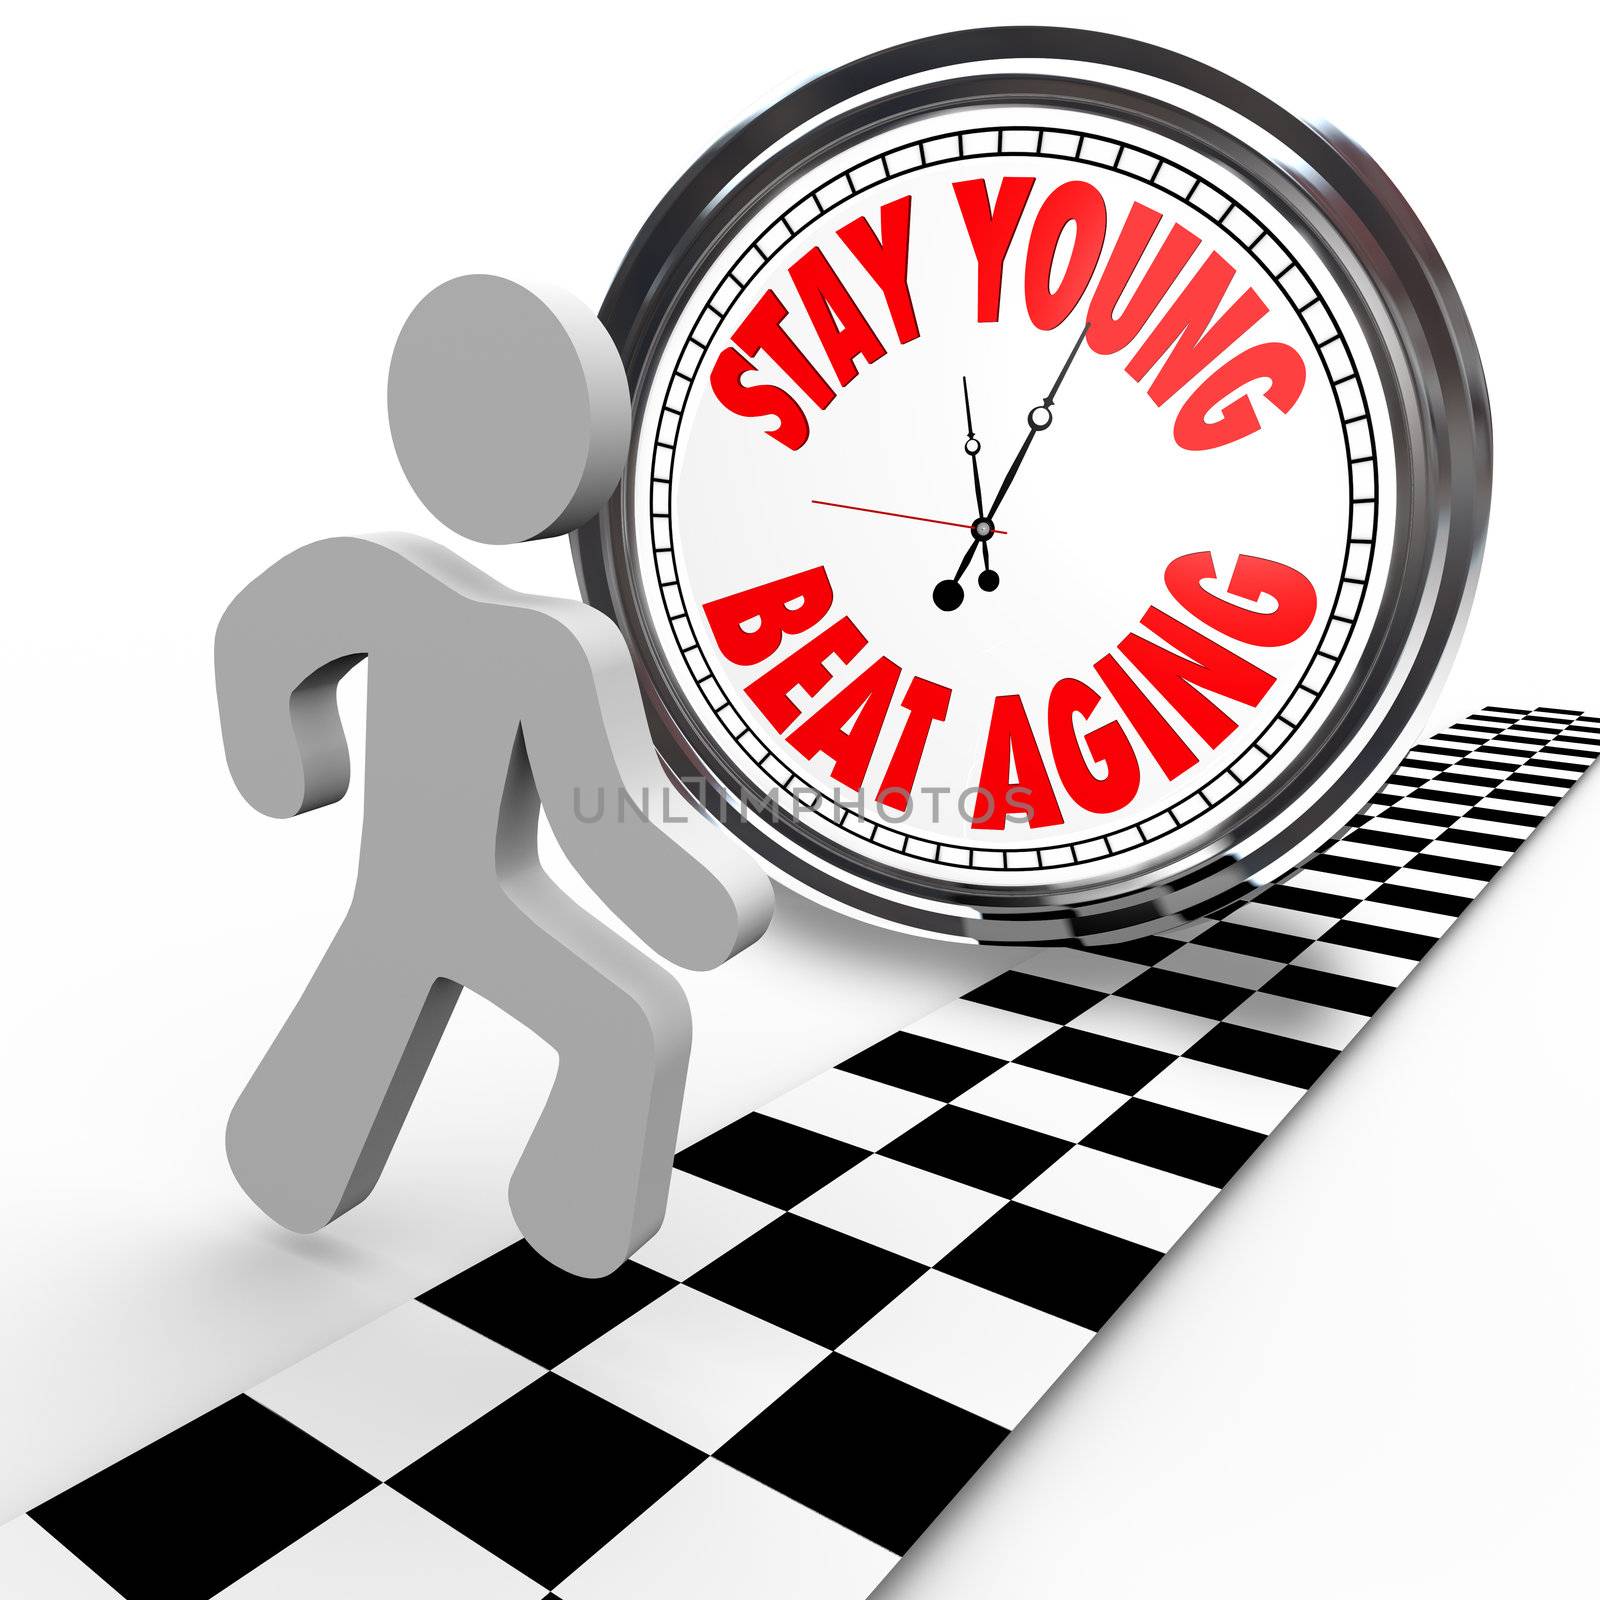 Stay Young Beat Aging Race Against Time Clock by iQoncept